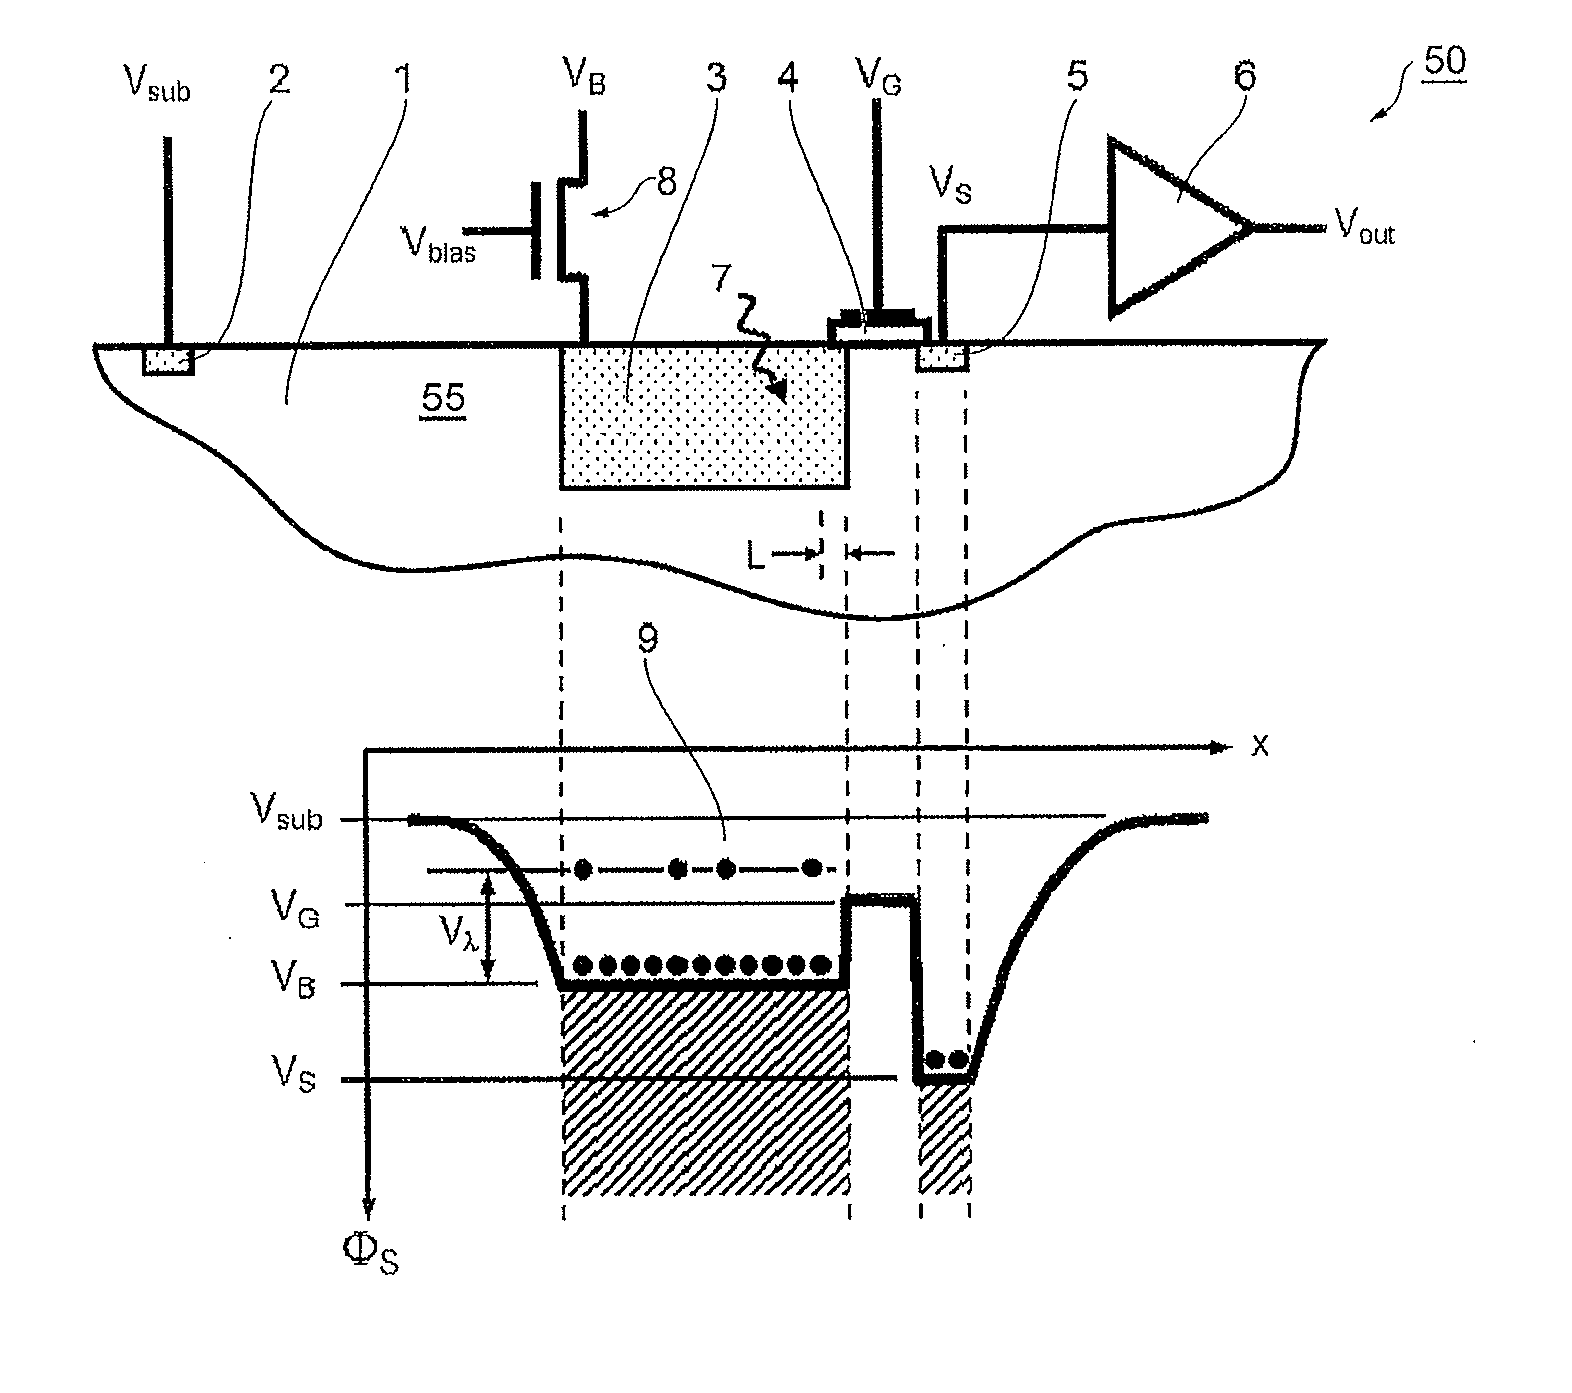 Semiconductor photosensor for infrared radiation